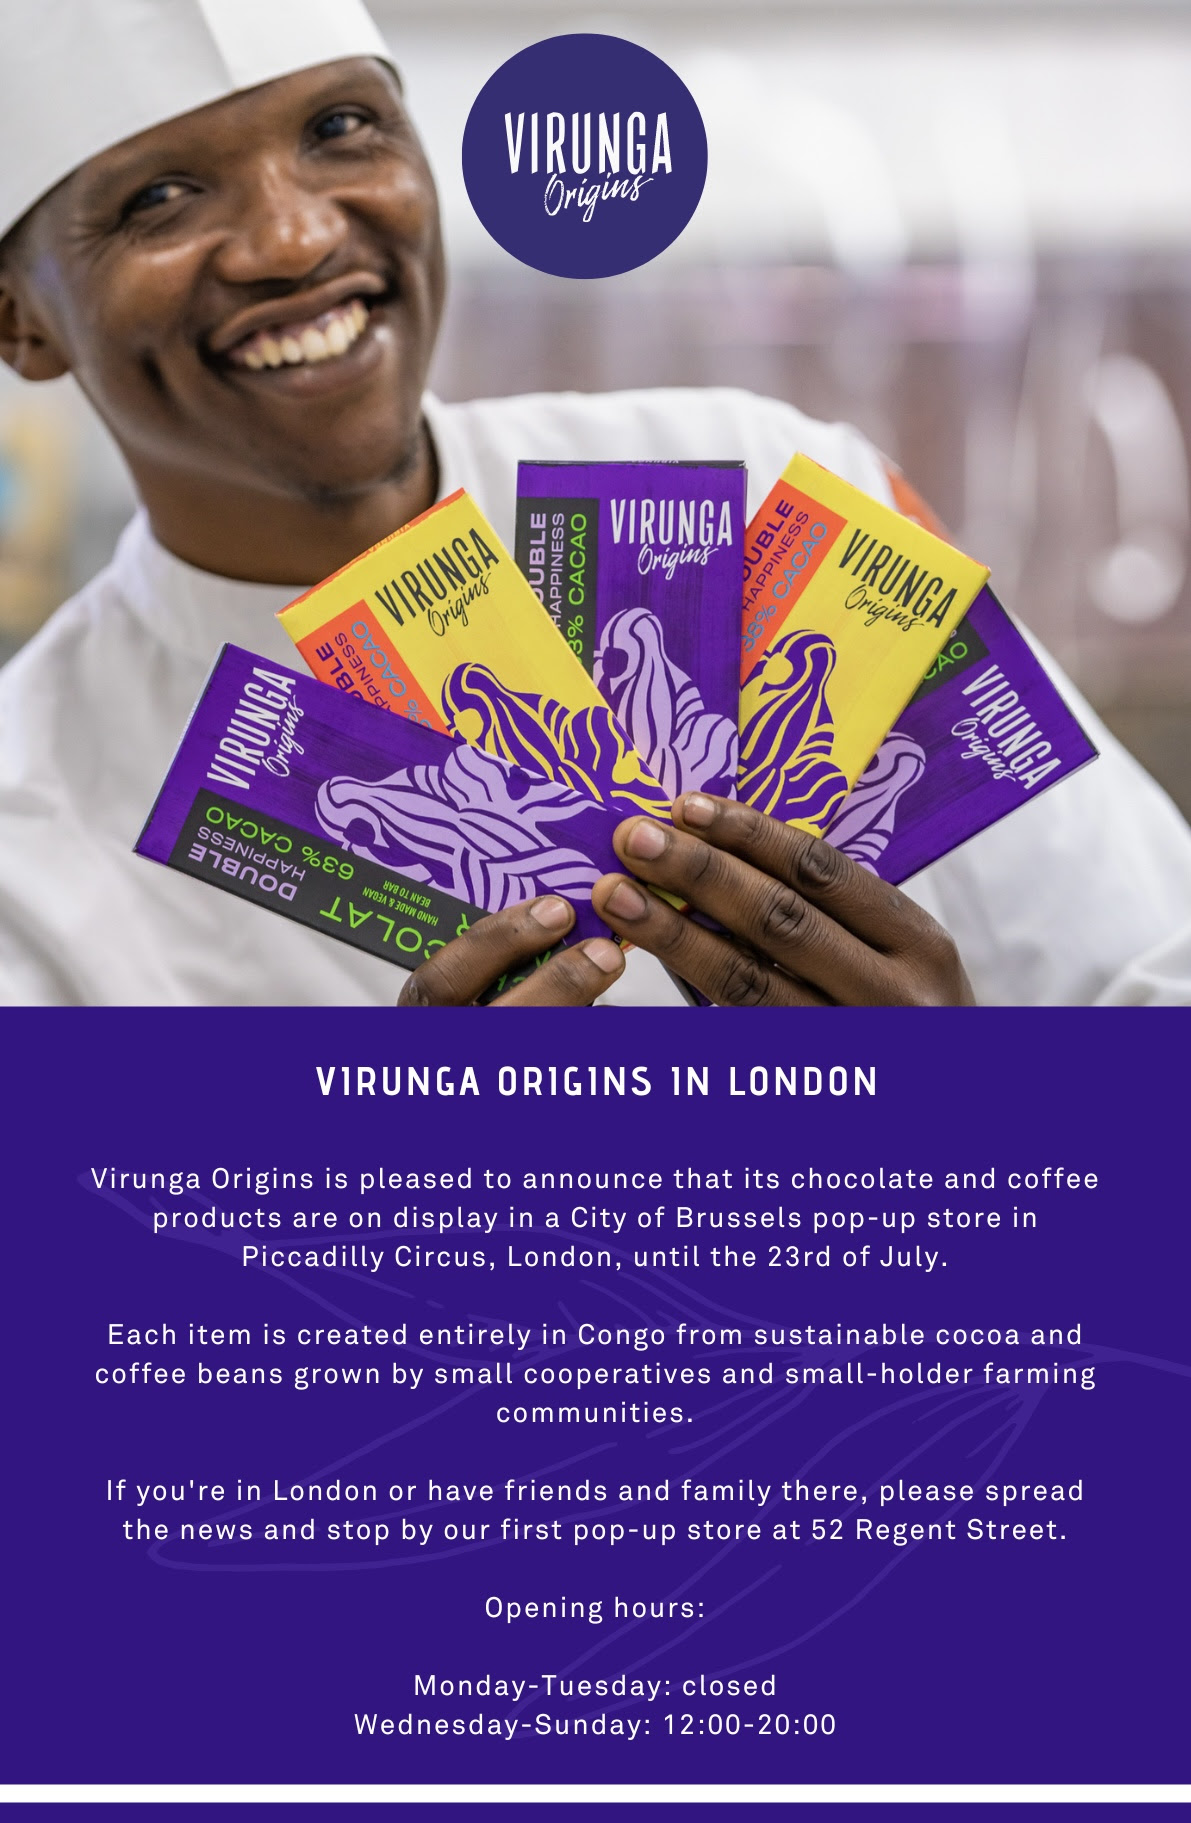 Virunga Origins is pleased to announce that its chocolate and coffee products are on display in a City of Brussels pop-up store in Piccadilly Circus, London, until the 23rd of July.